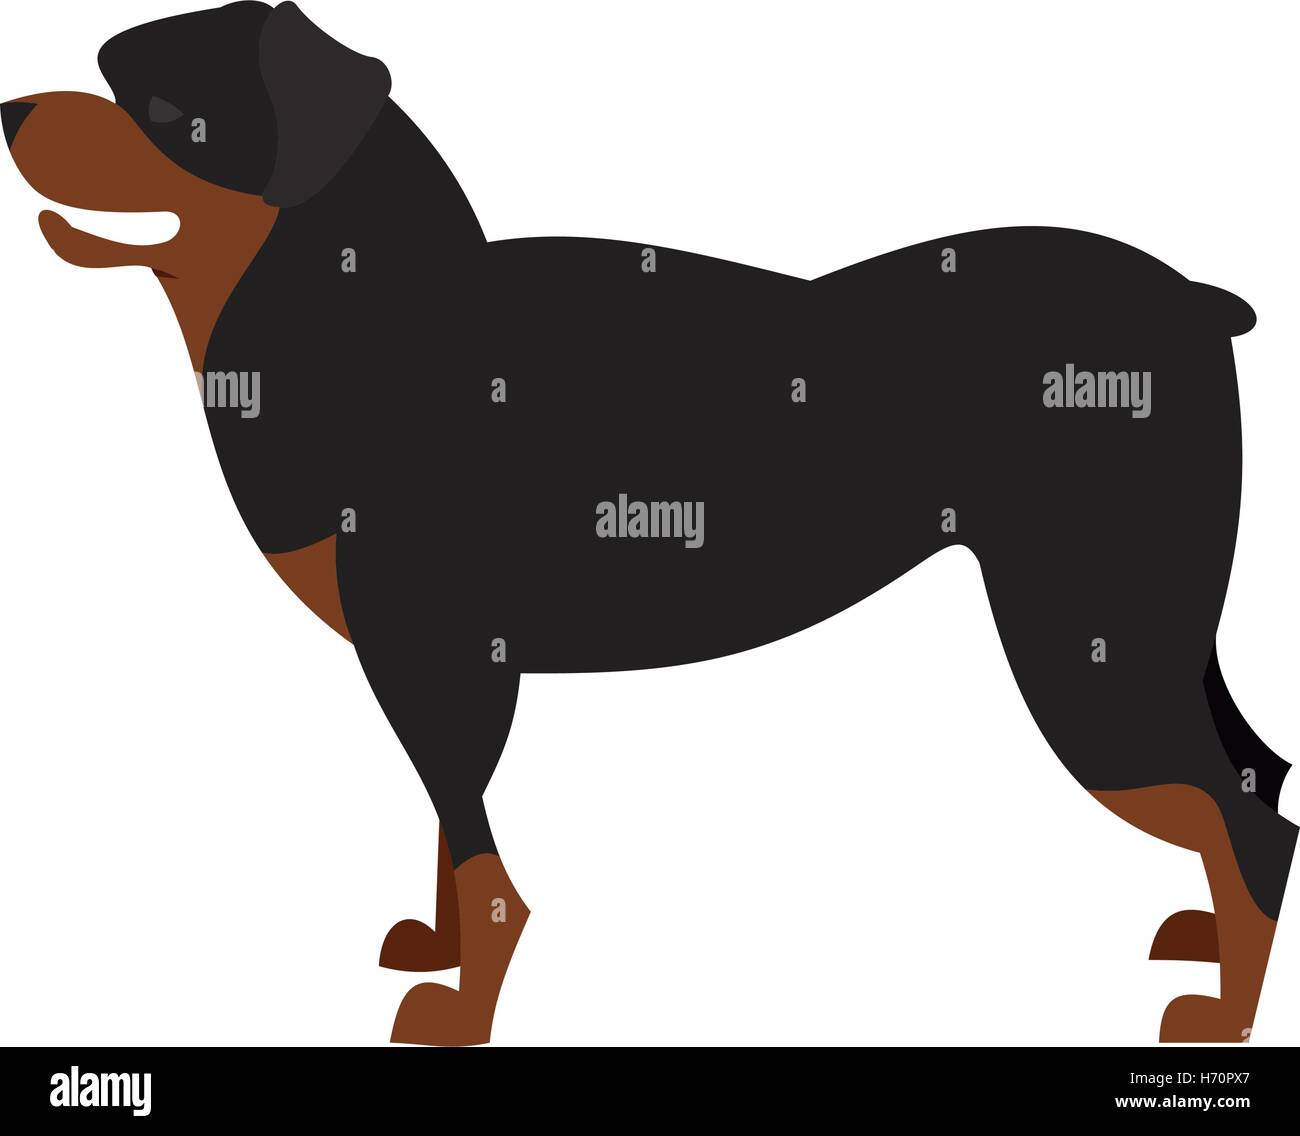 Dog breed rottweiler and animal pet domestic, purebred cute hound, vector illustration Stock Vector